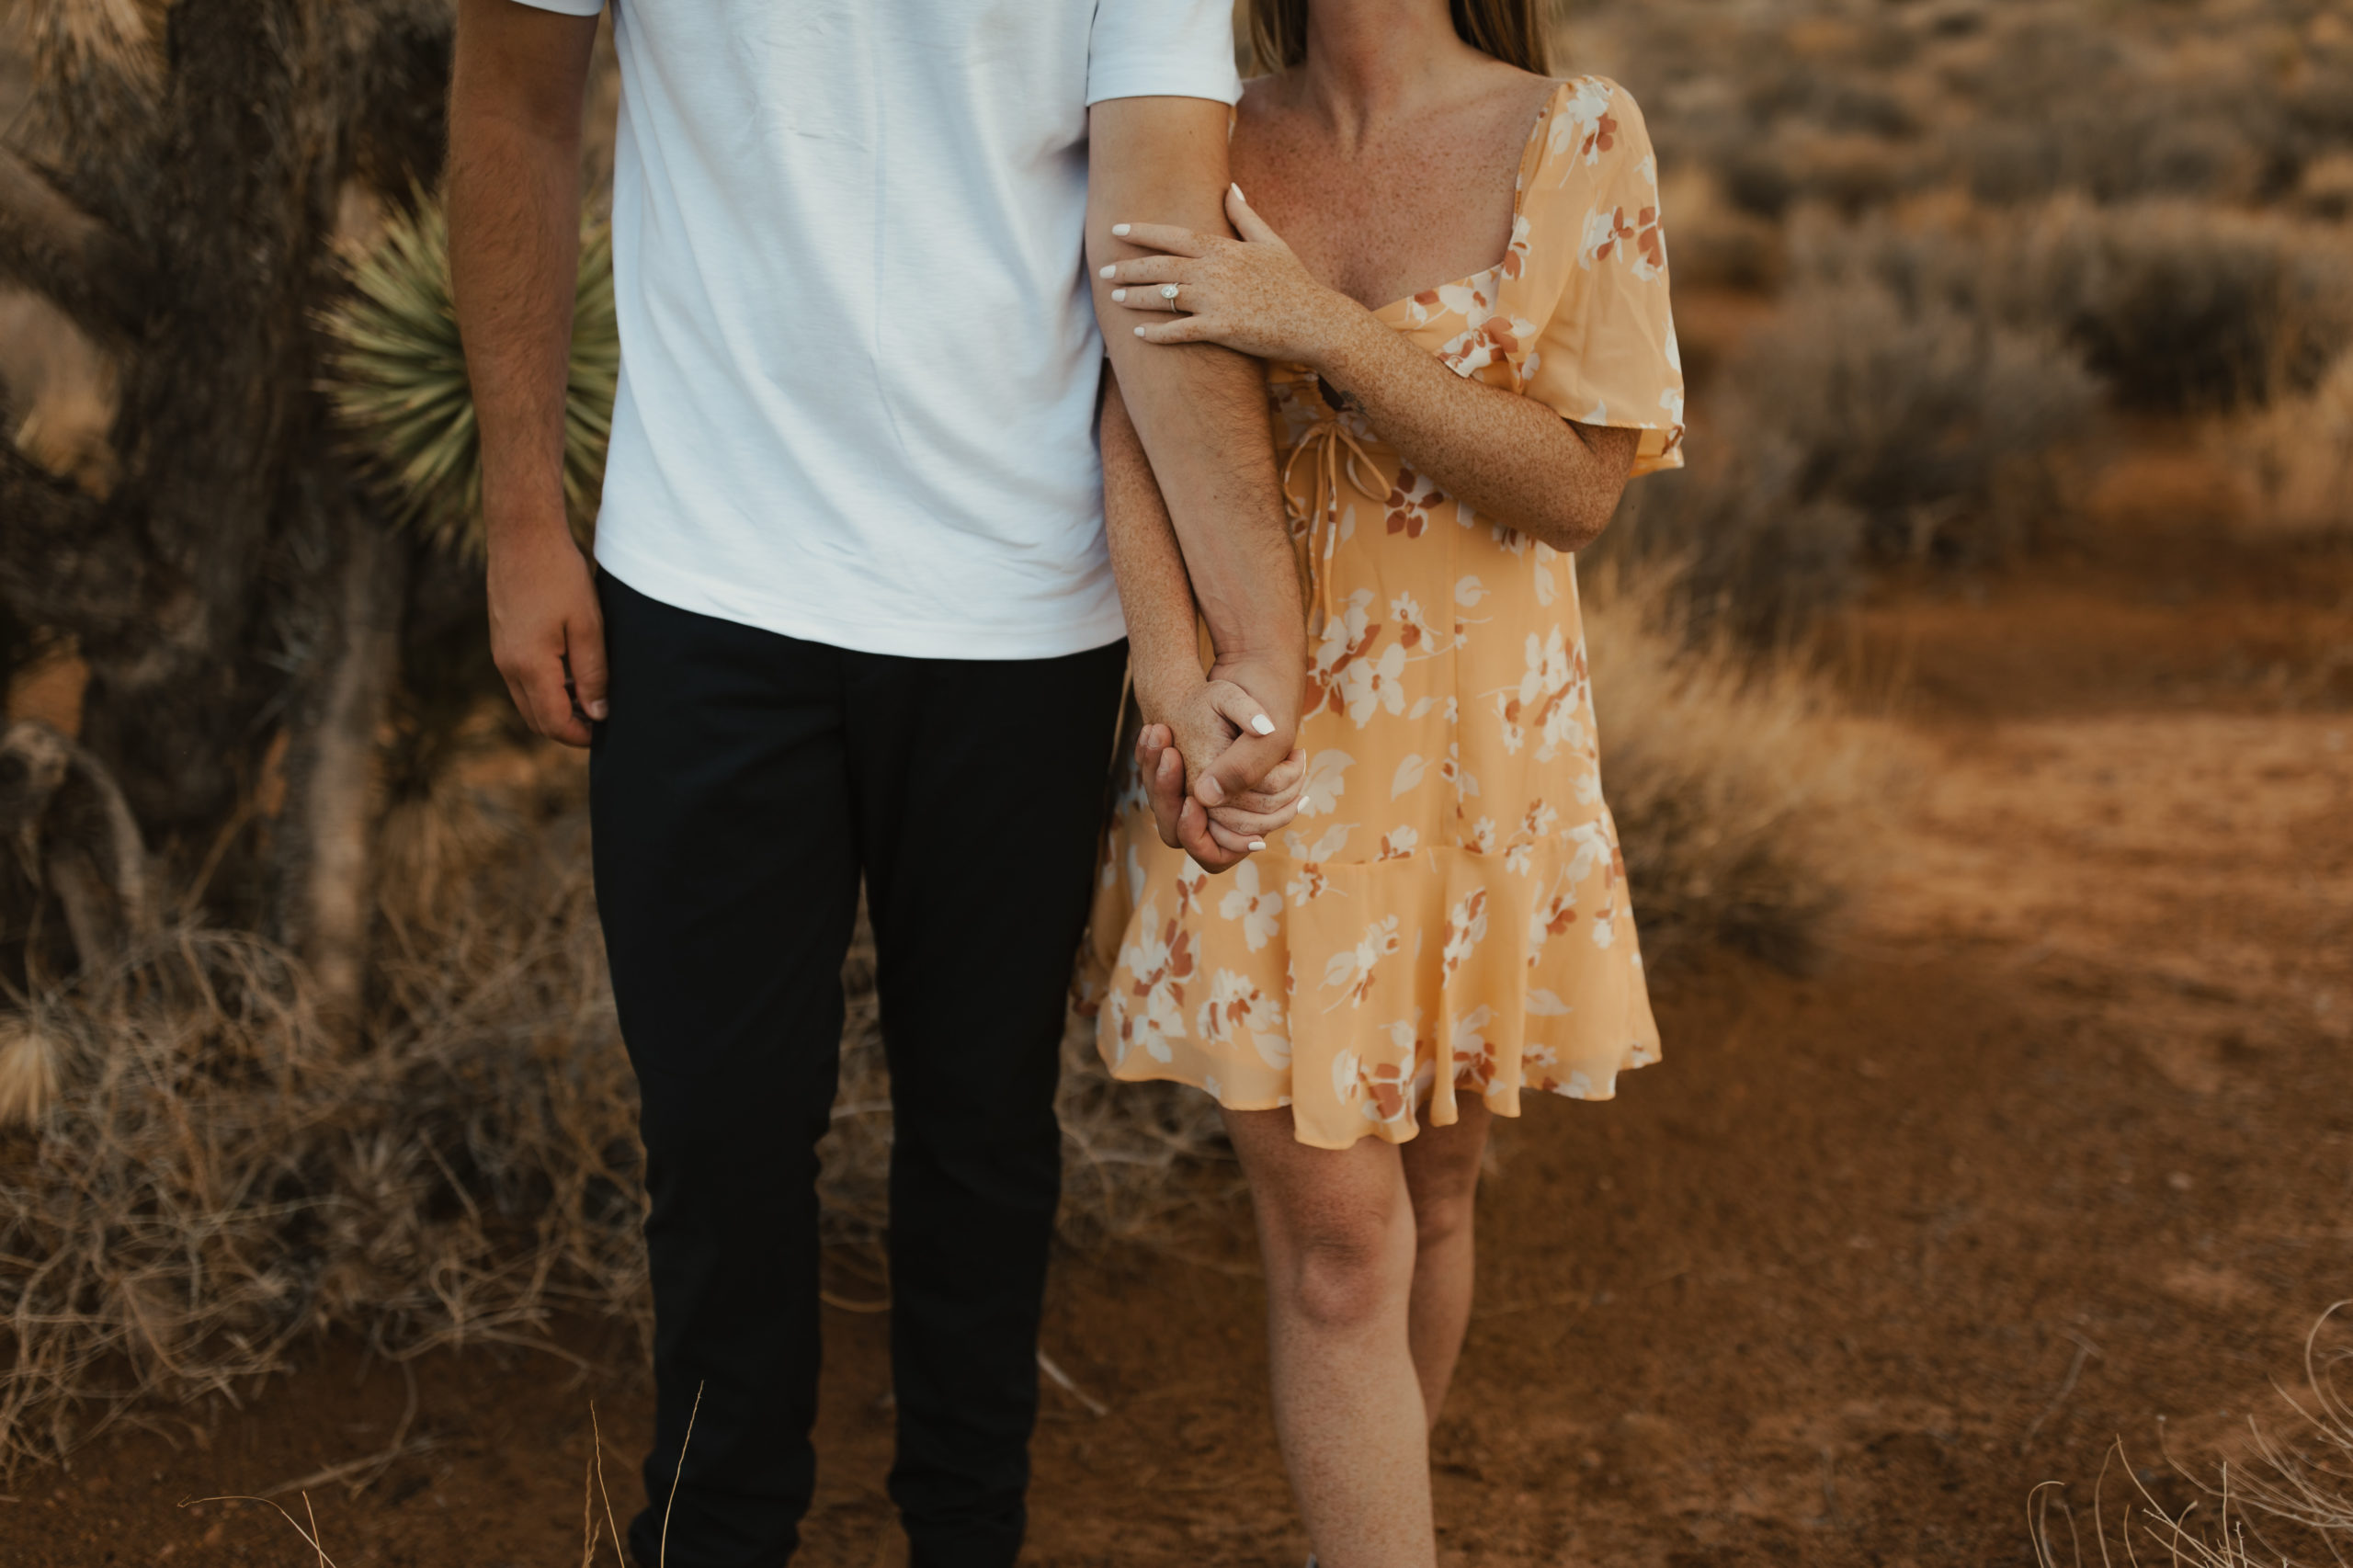 photo of engaged couple holding hands walking through the desert